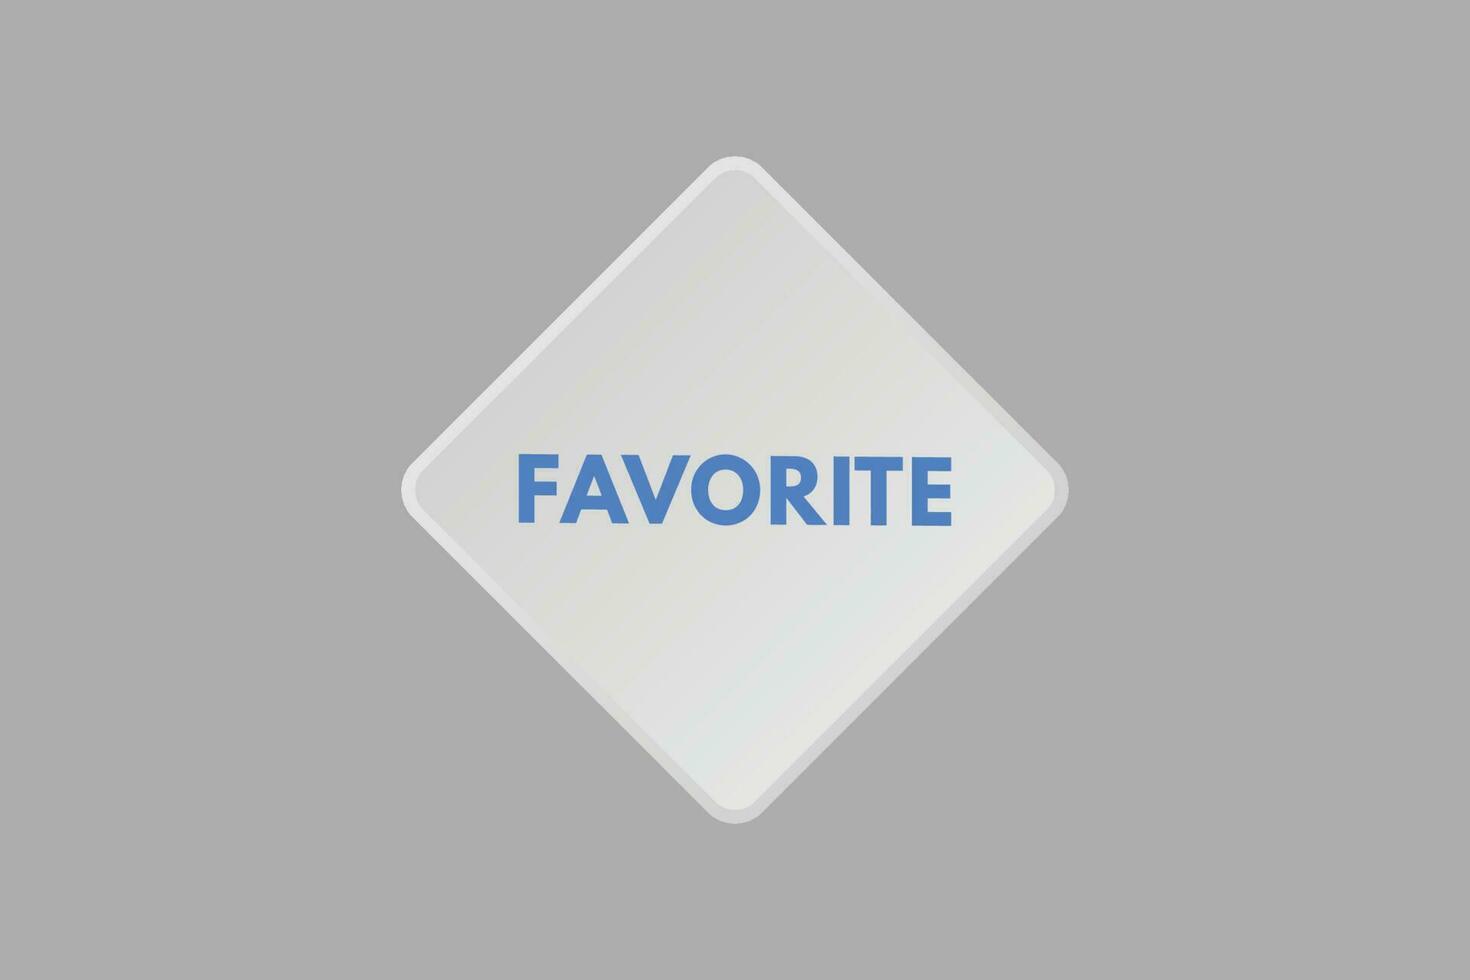 Favorite text Button. Favorite Sign Icon Label Sticker Web Buttons vector